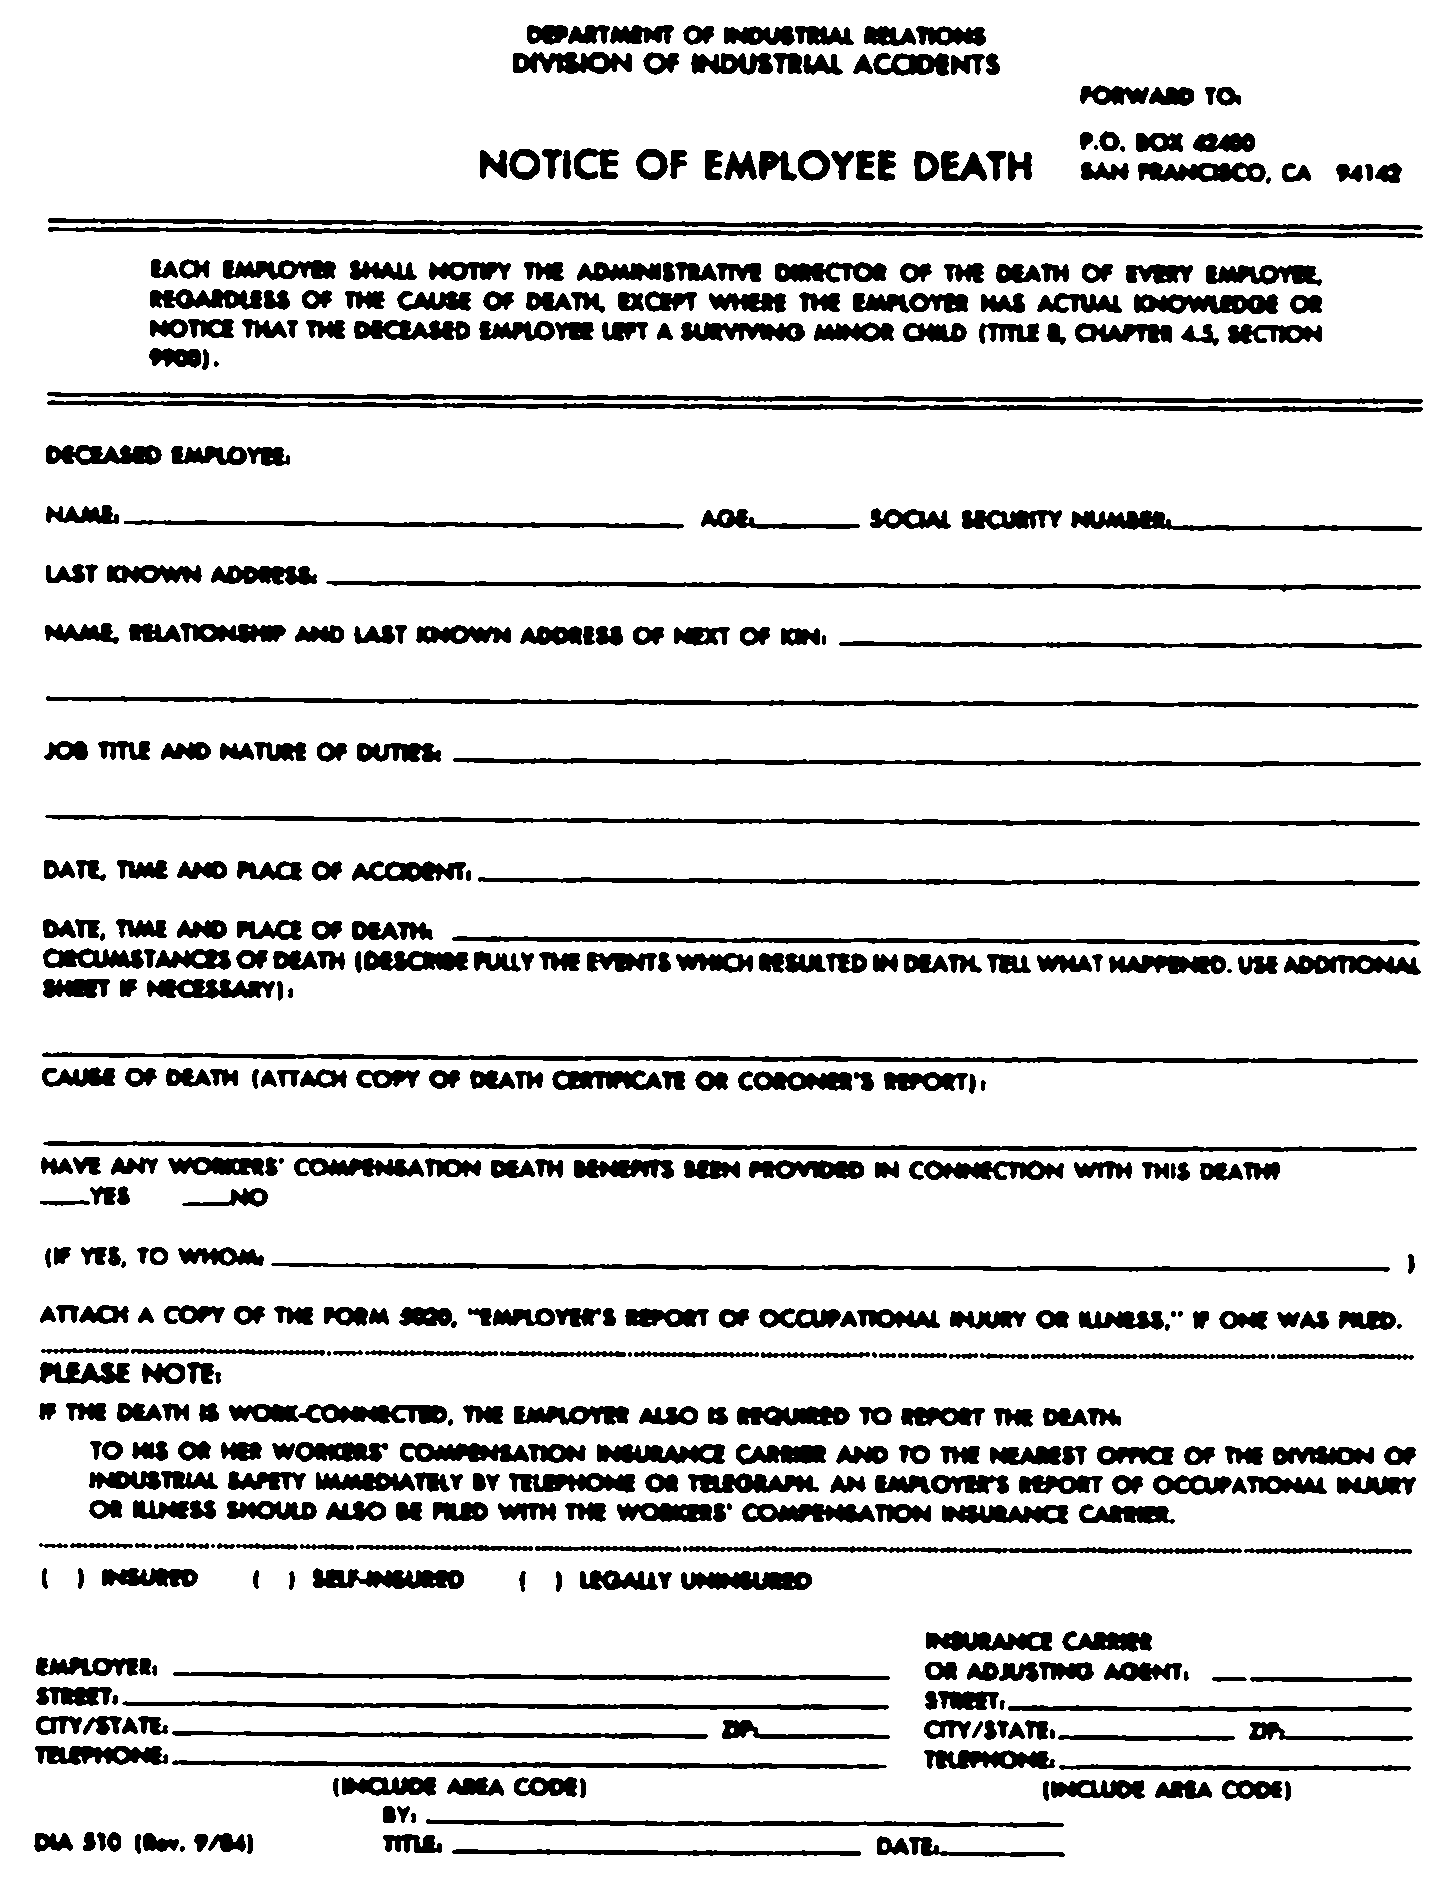 Image 1 within § 9910. DIA Form 510: Notice of Employee Death.